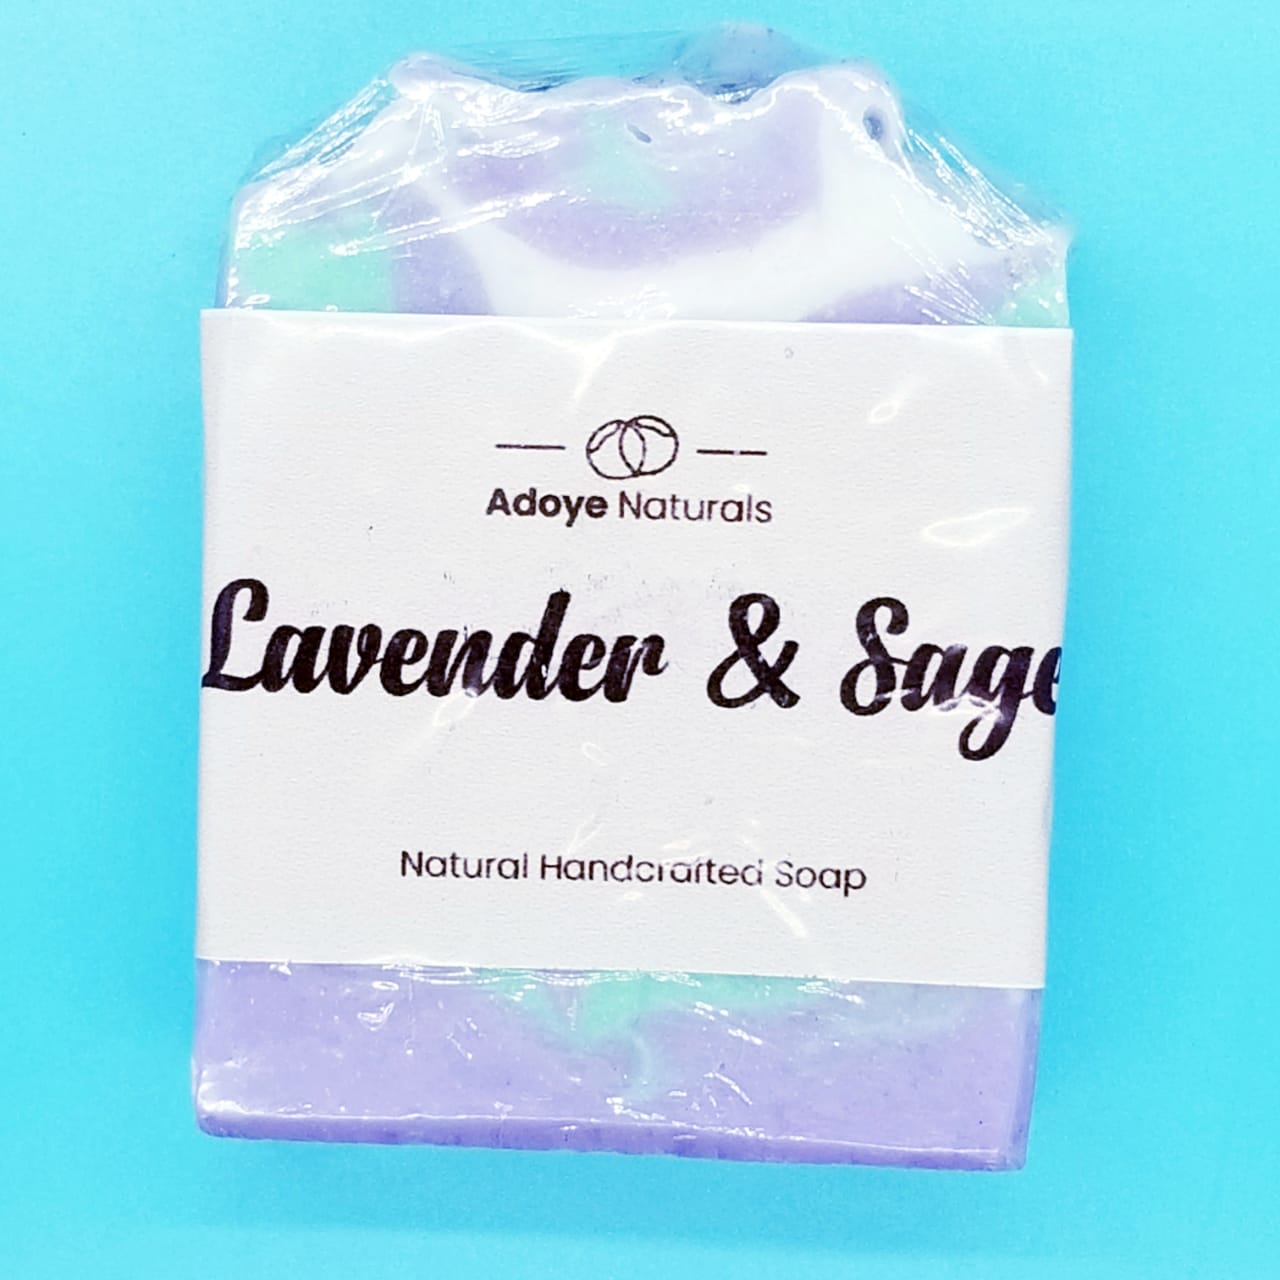 Natural Hand Crafted Soap, Adoye Naturals